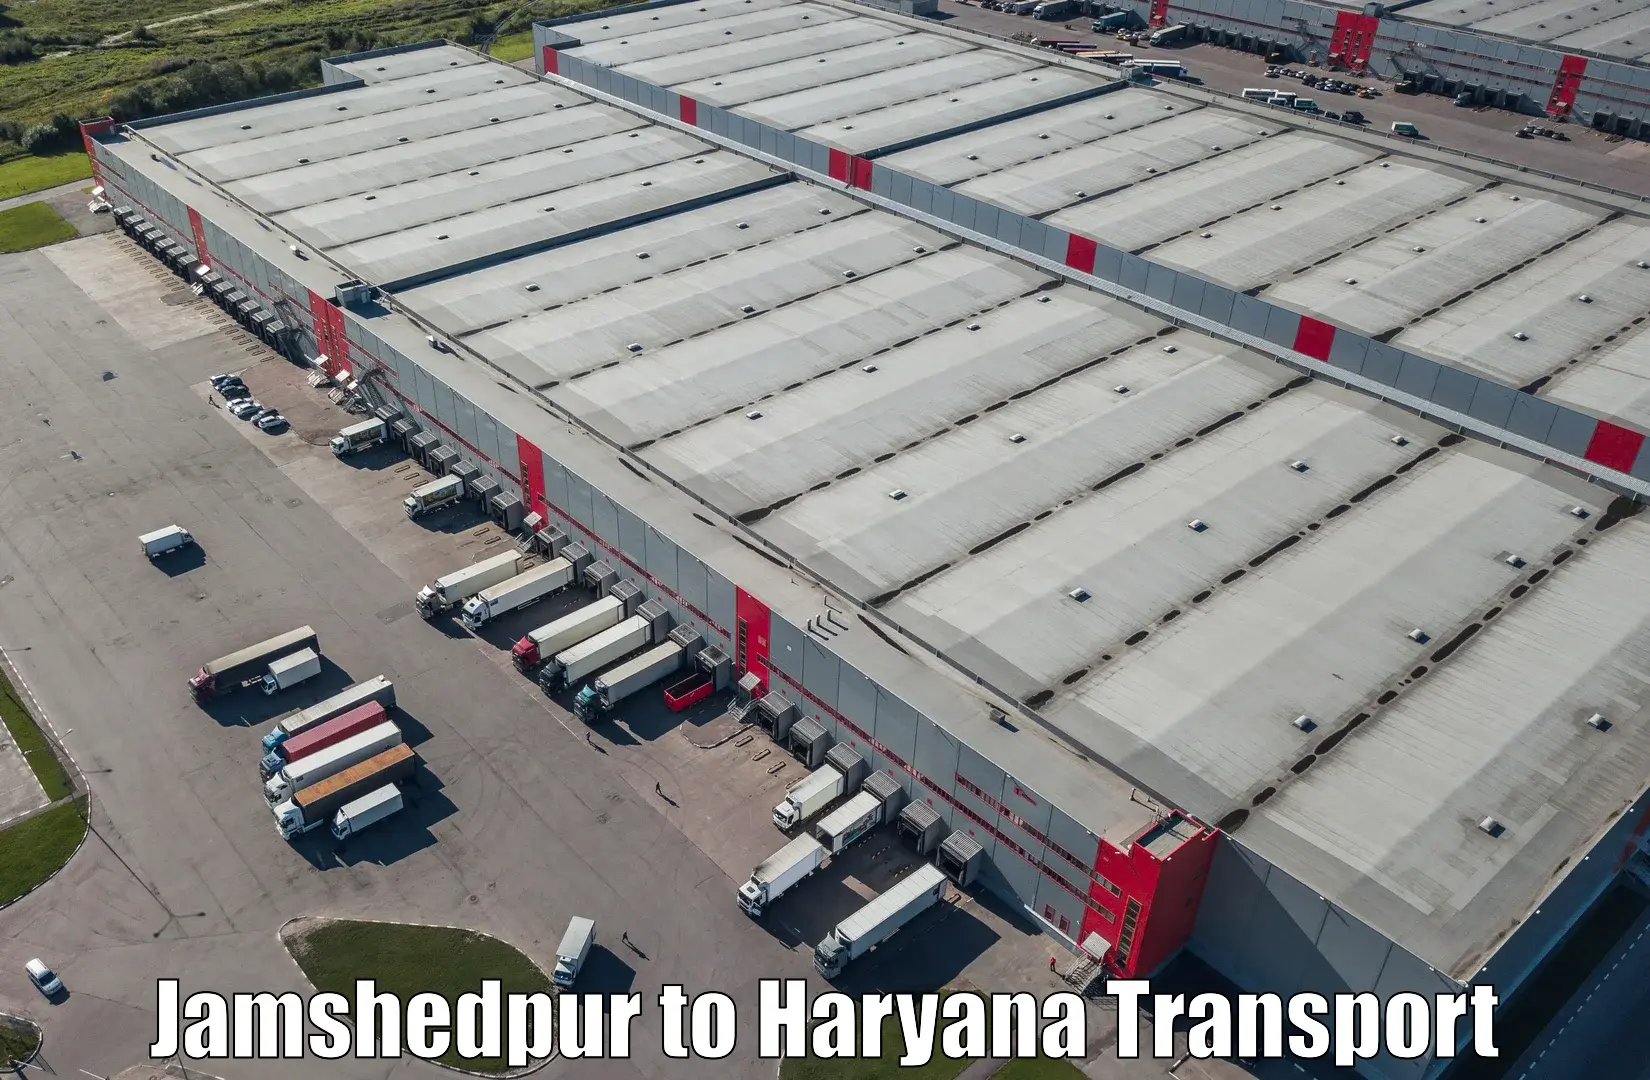 Nearby transport service Jamshedpur to Faridabad